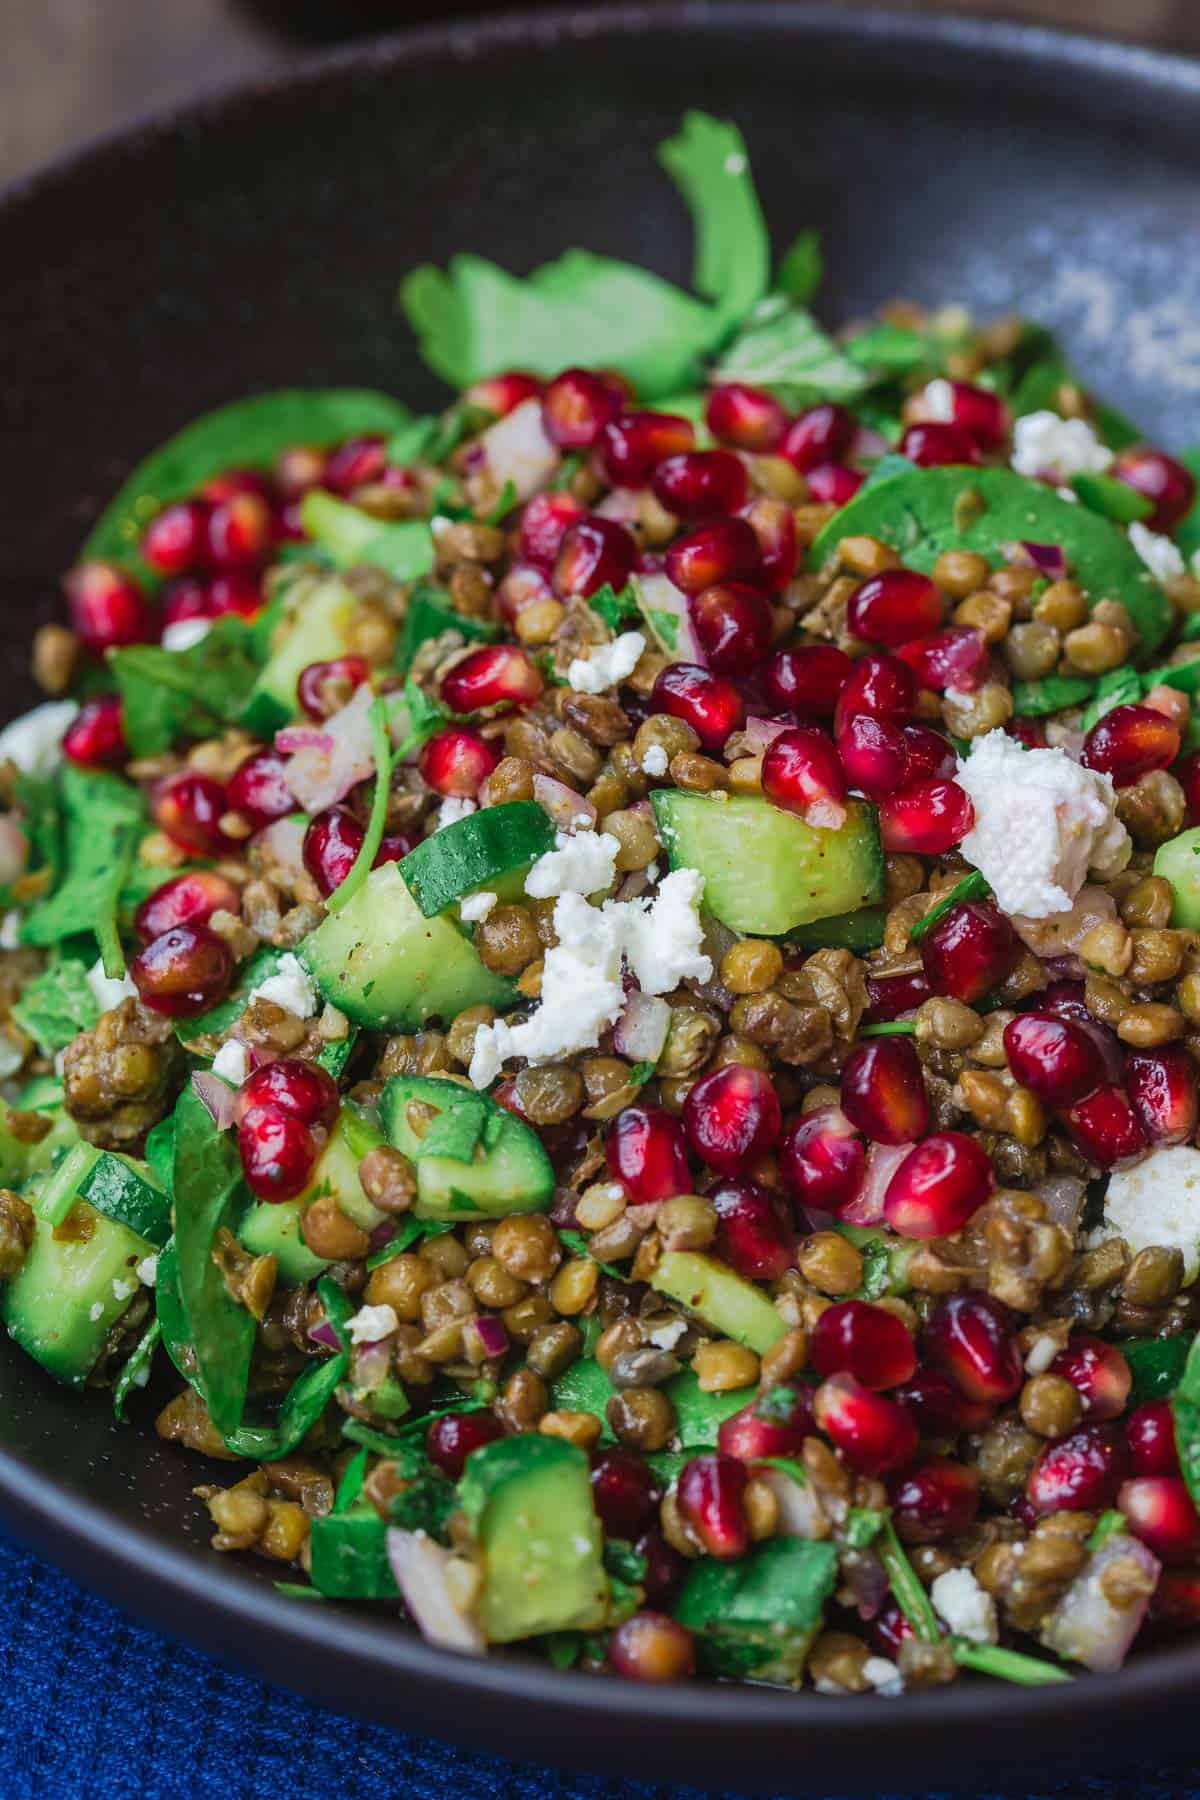 Lentil salad with pomegranates, feta cheese and vegetables